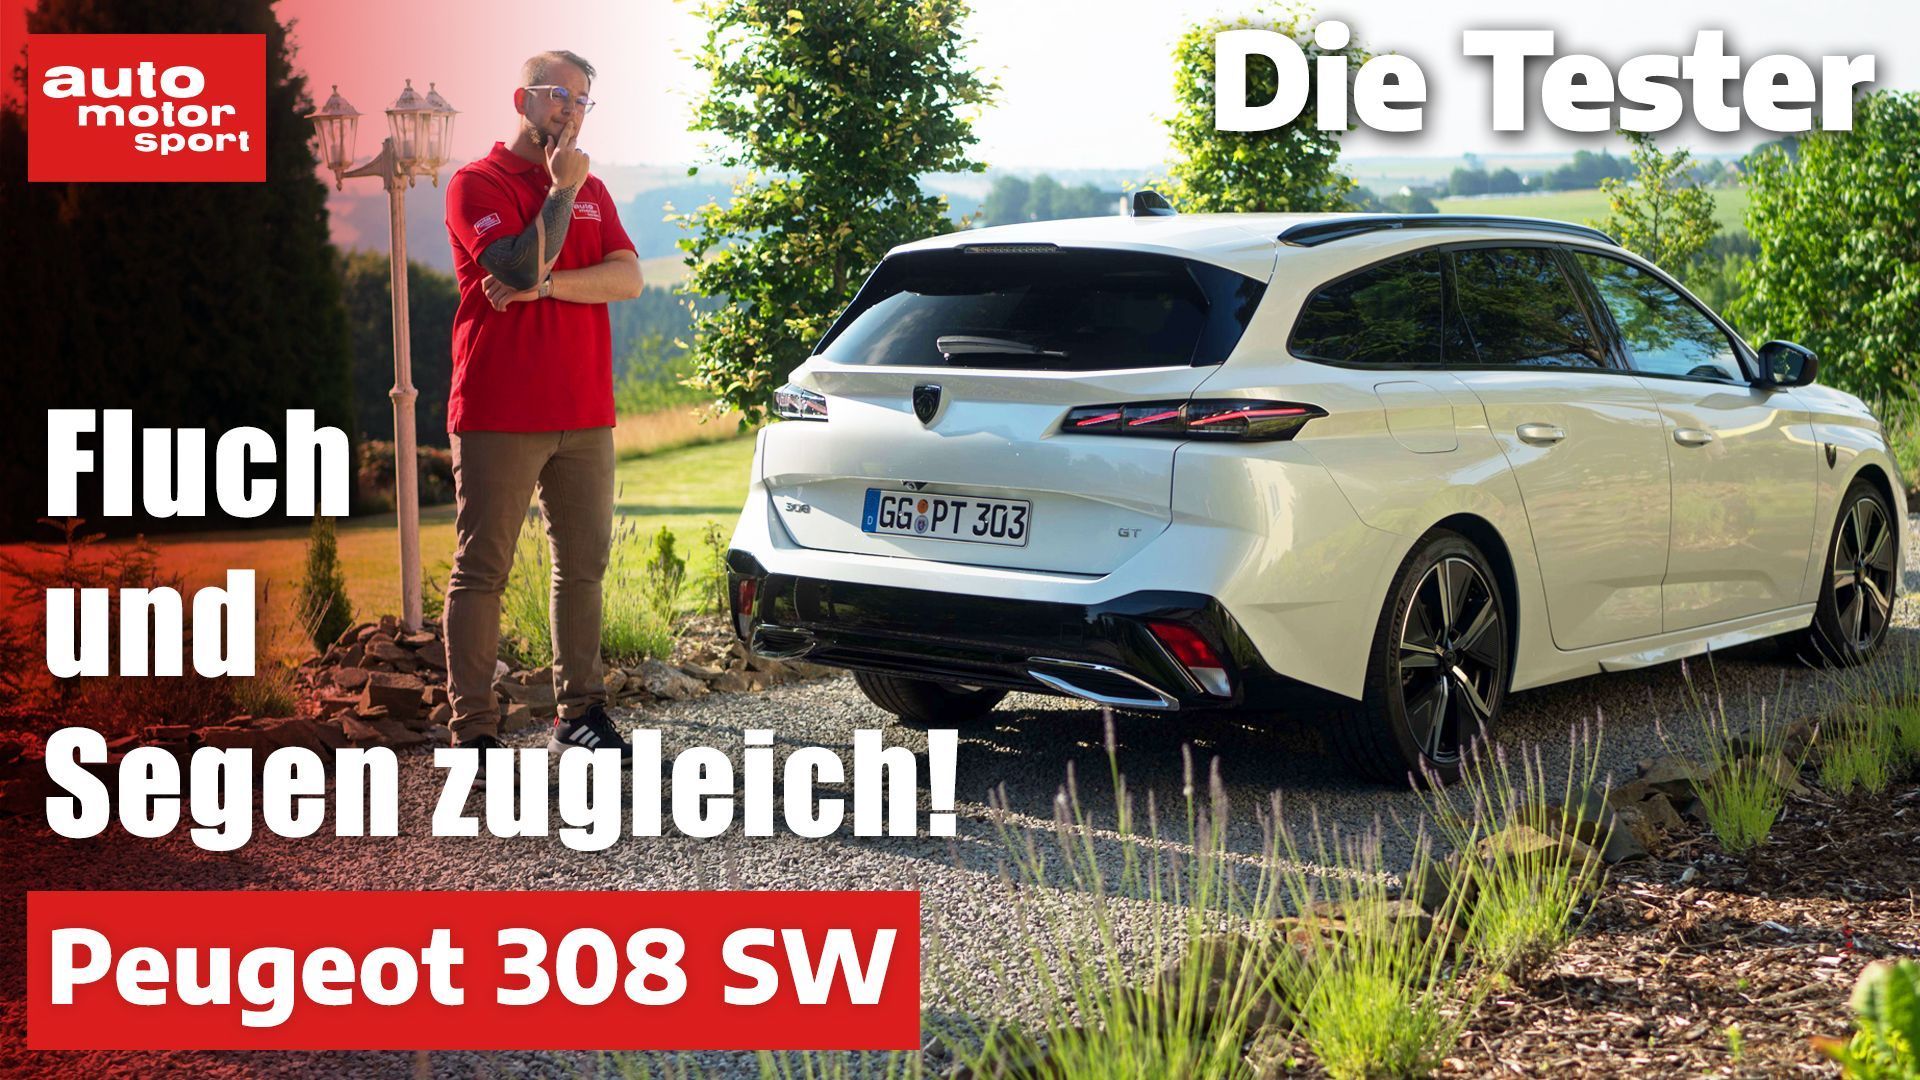 Peugeot 308 SW: both a curse and a blessing!